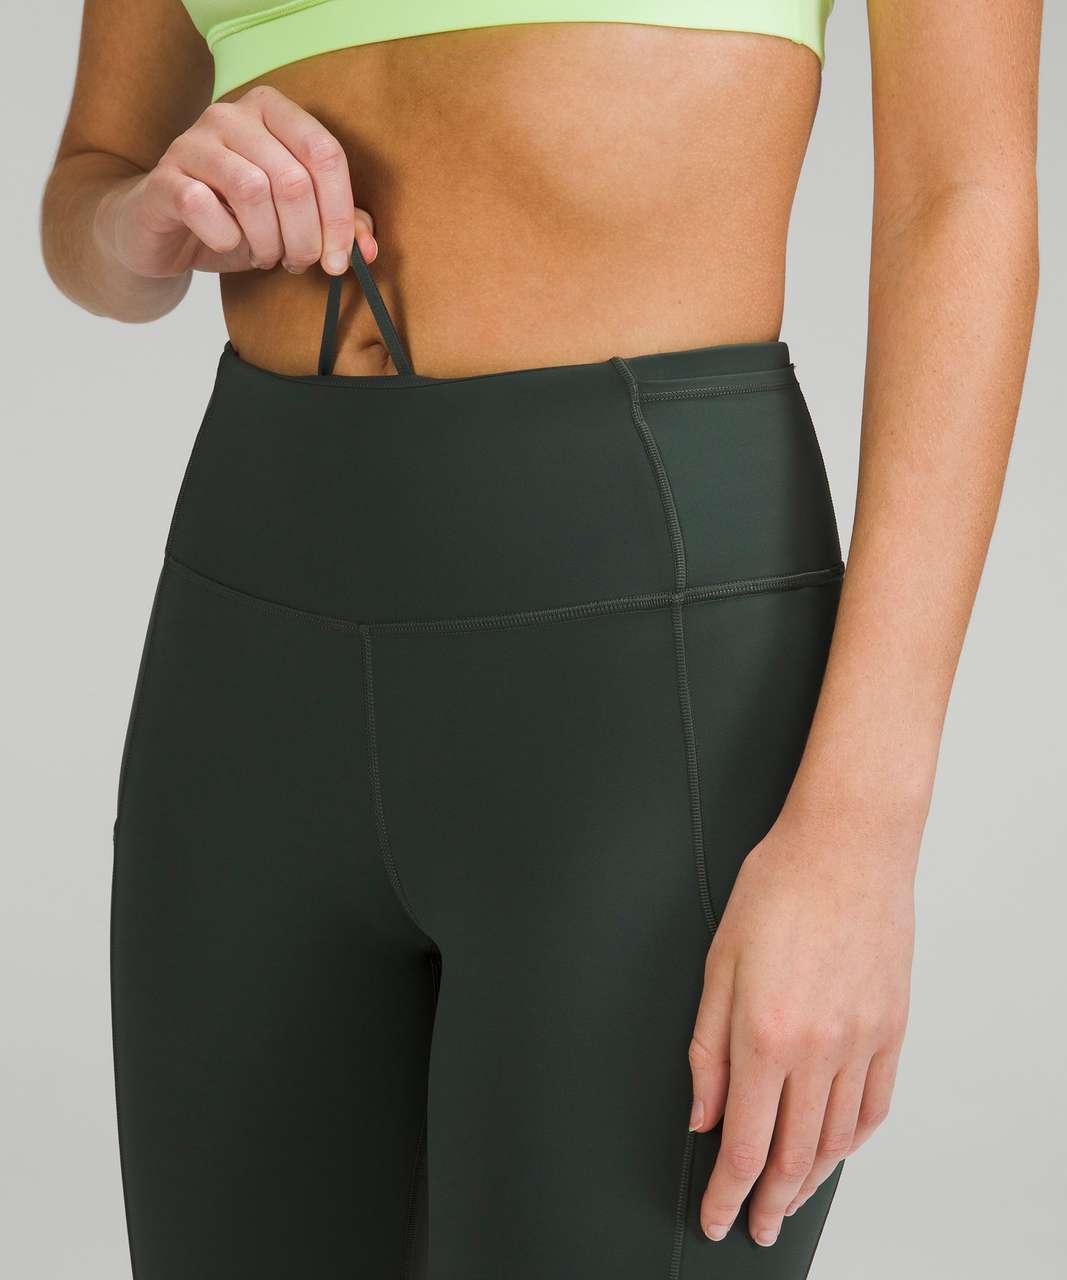 Lululemon Fast and Free High-Rise Crop 19" - Smoked Spruce